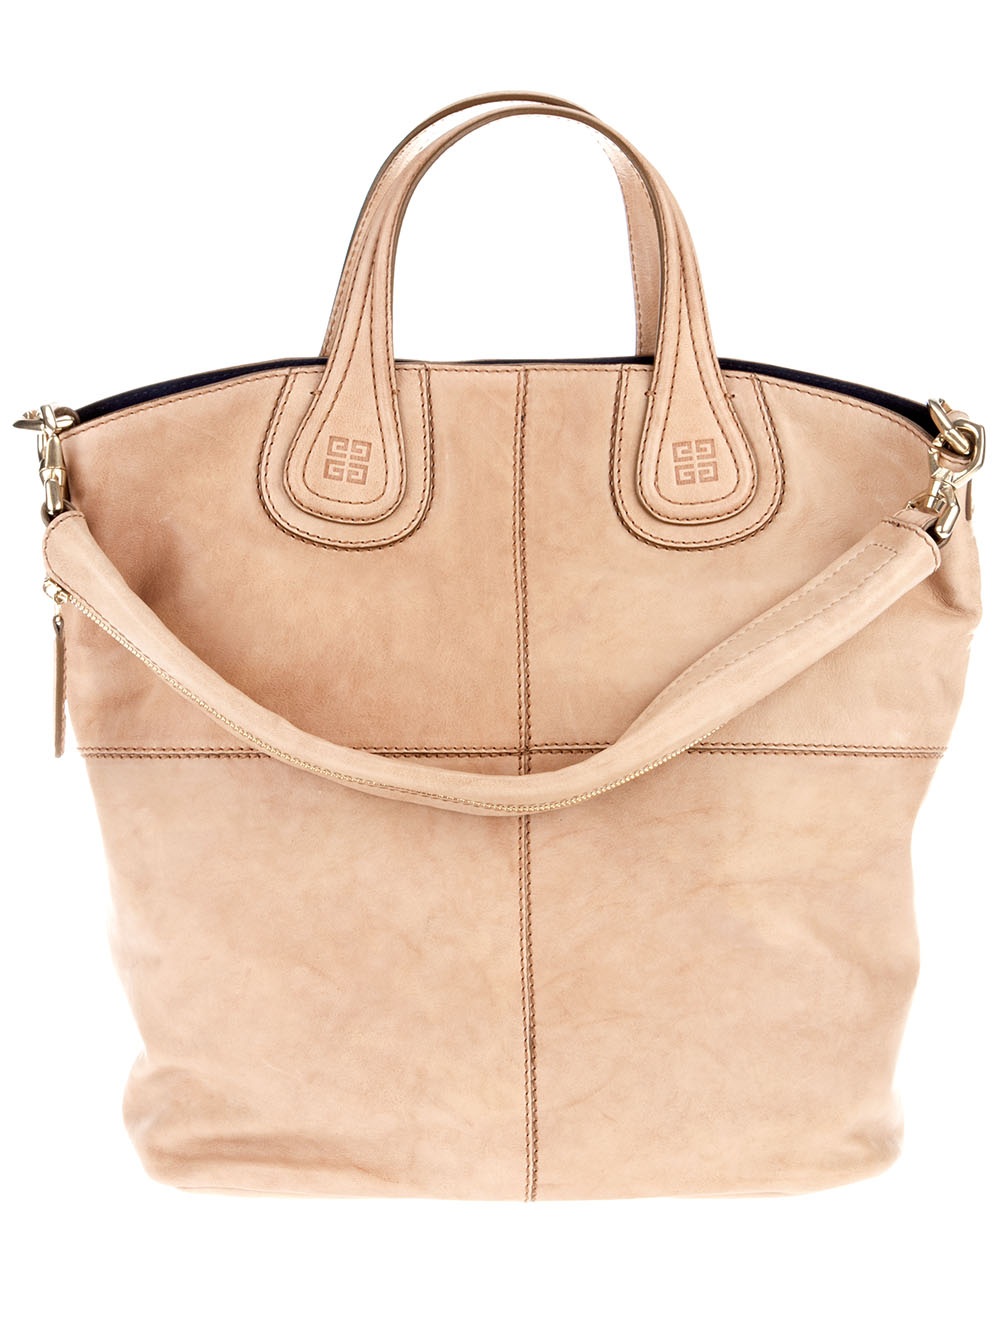 Givenchy Nightingale Bag in Pink | Lyst